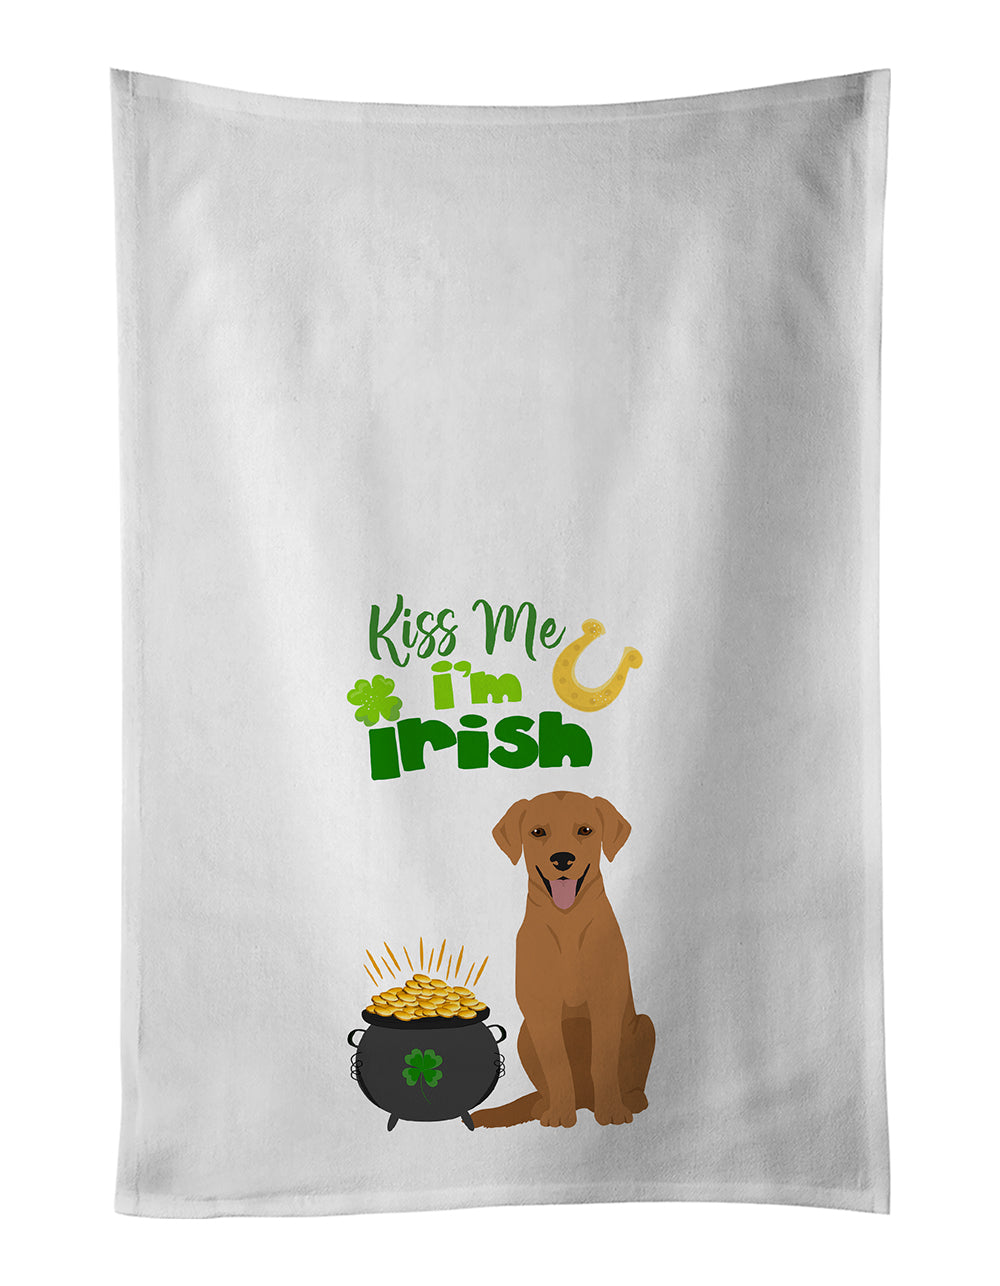 Buy this Red Fox Labrador Retriever St. Patrick's Day White Kitchen Towel Set of 2 Dish Towels